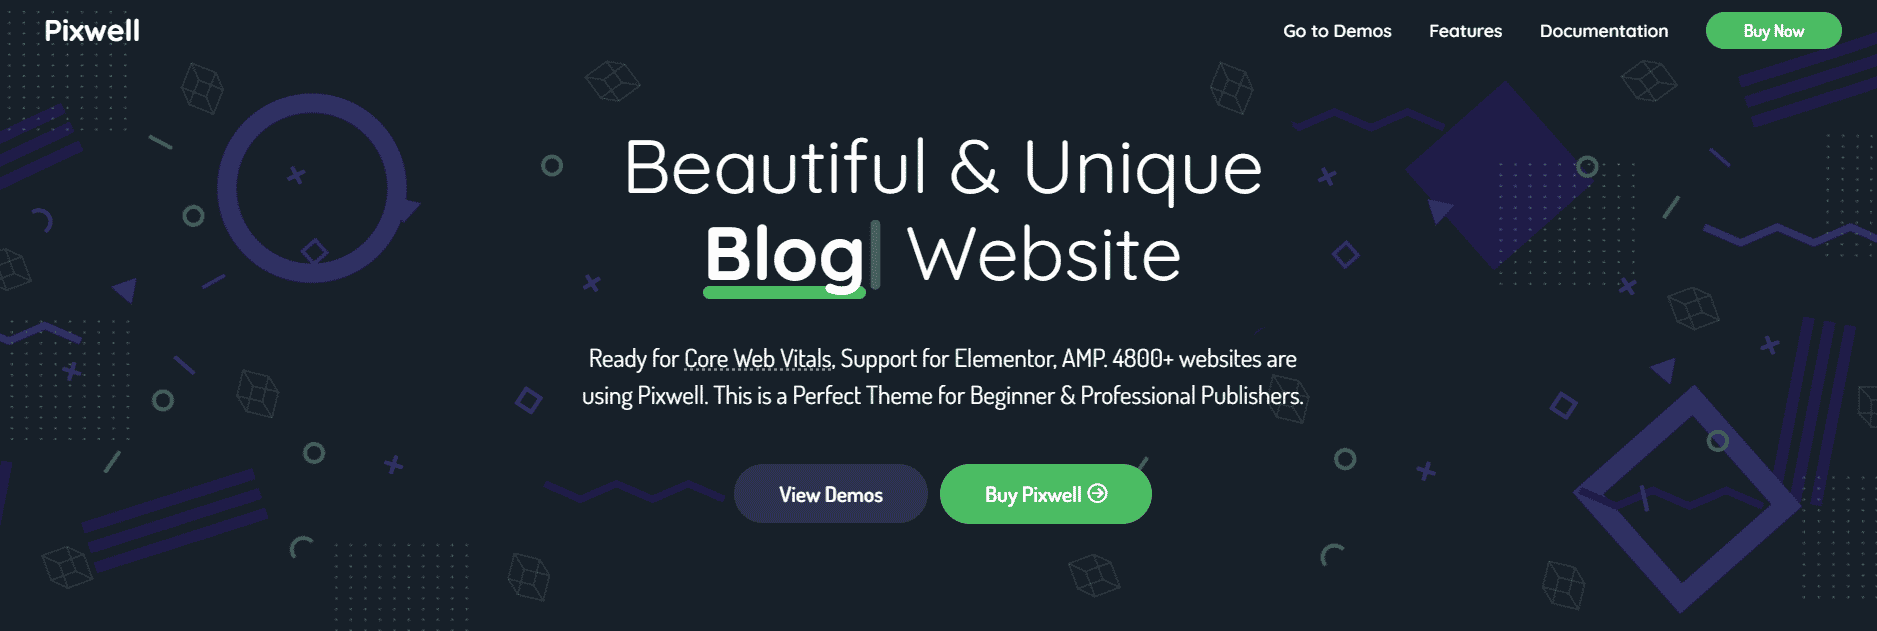 Screenshot of the website for Pixwell, one of the best affiliate WordPress themes.